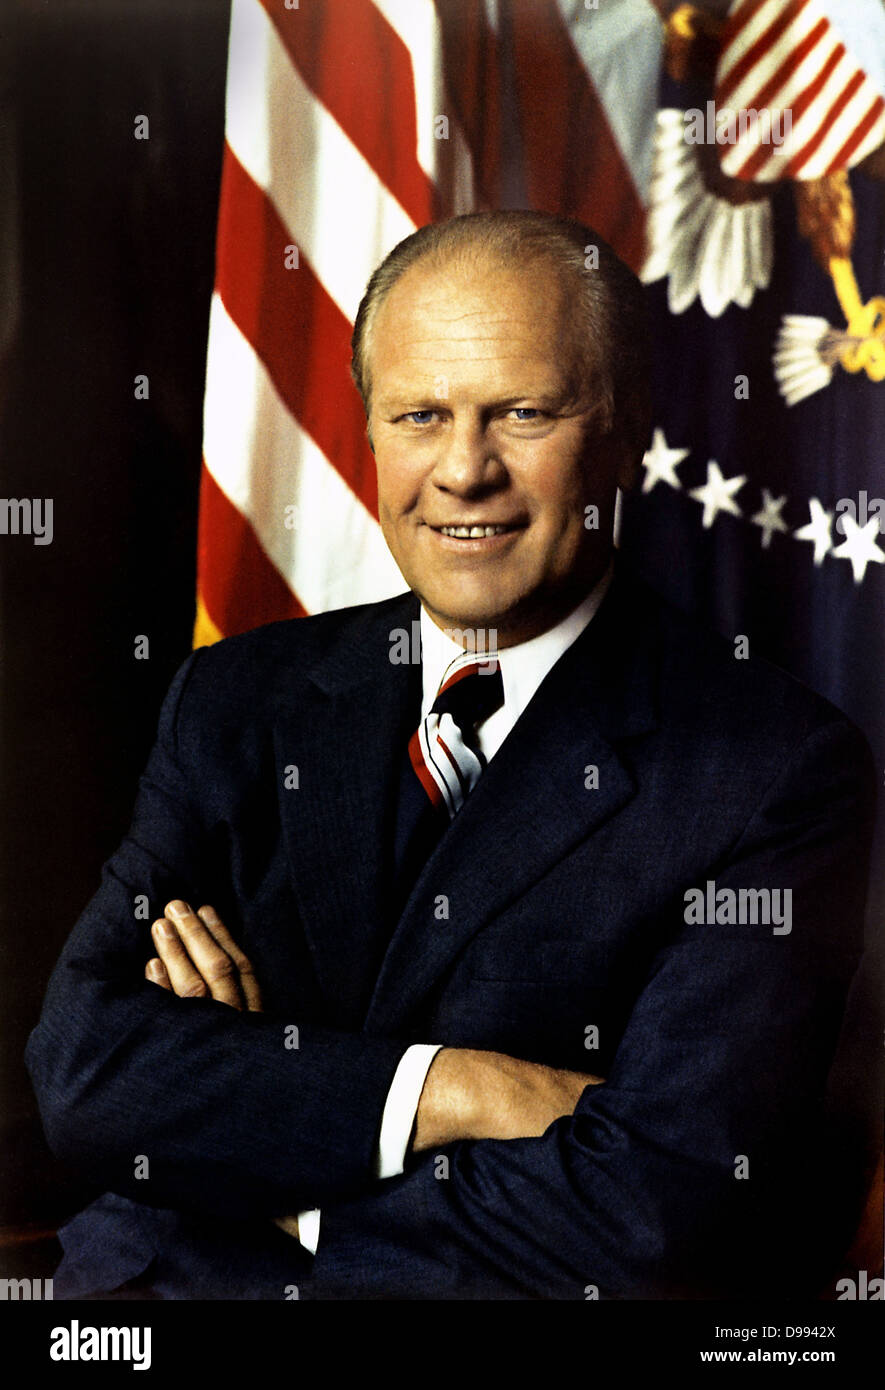 Gerald Ford (1913-2006) 38th President of the United States 1974-1977. Became President on resignation of Richard Nixon. Head-and-shoulders portrait with stars-and-stripes in background. American Politician Republican Stock Photo